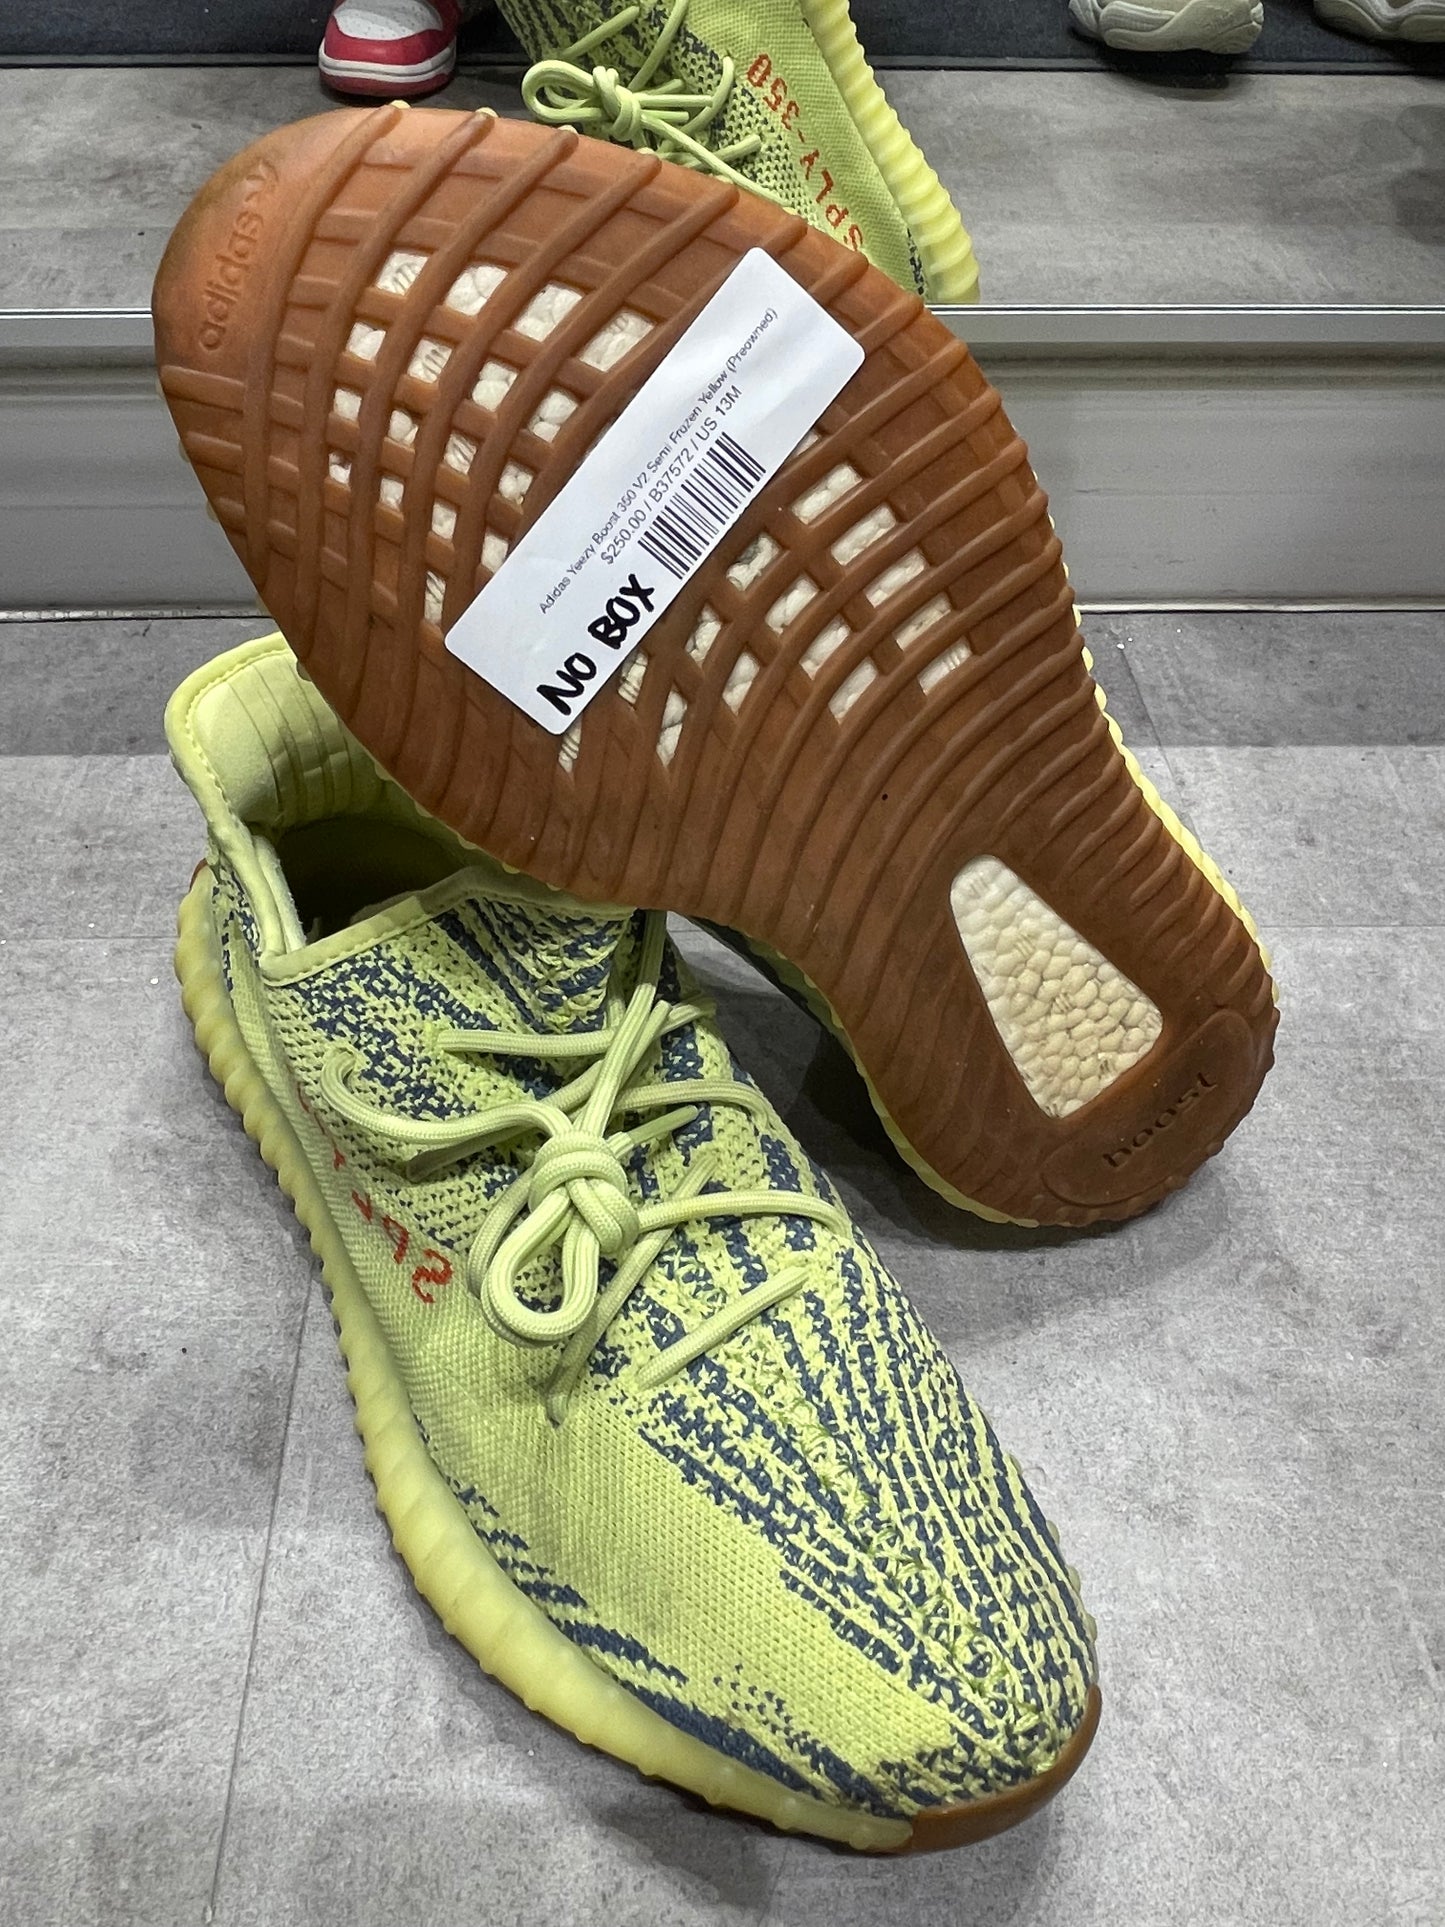 Adidas Yeezy Boost 350 V2 Semi Frozen Yellow (Preowned)